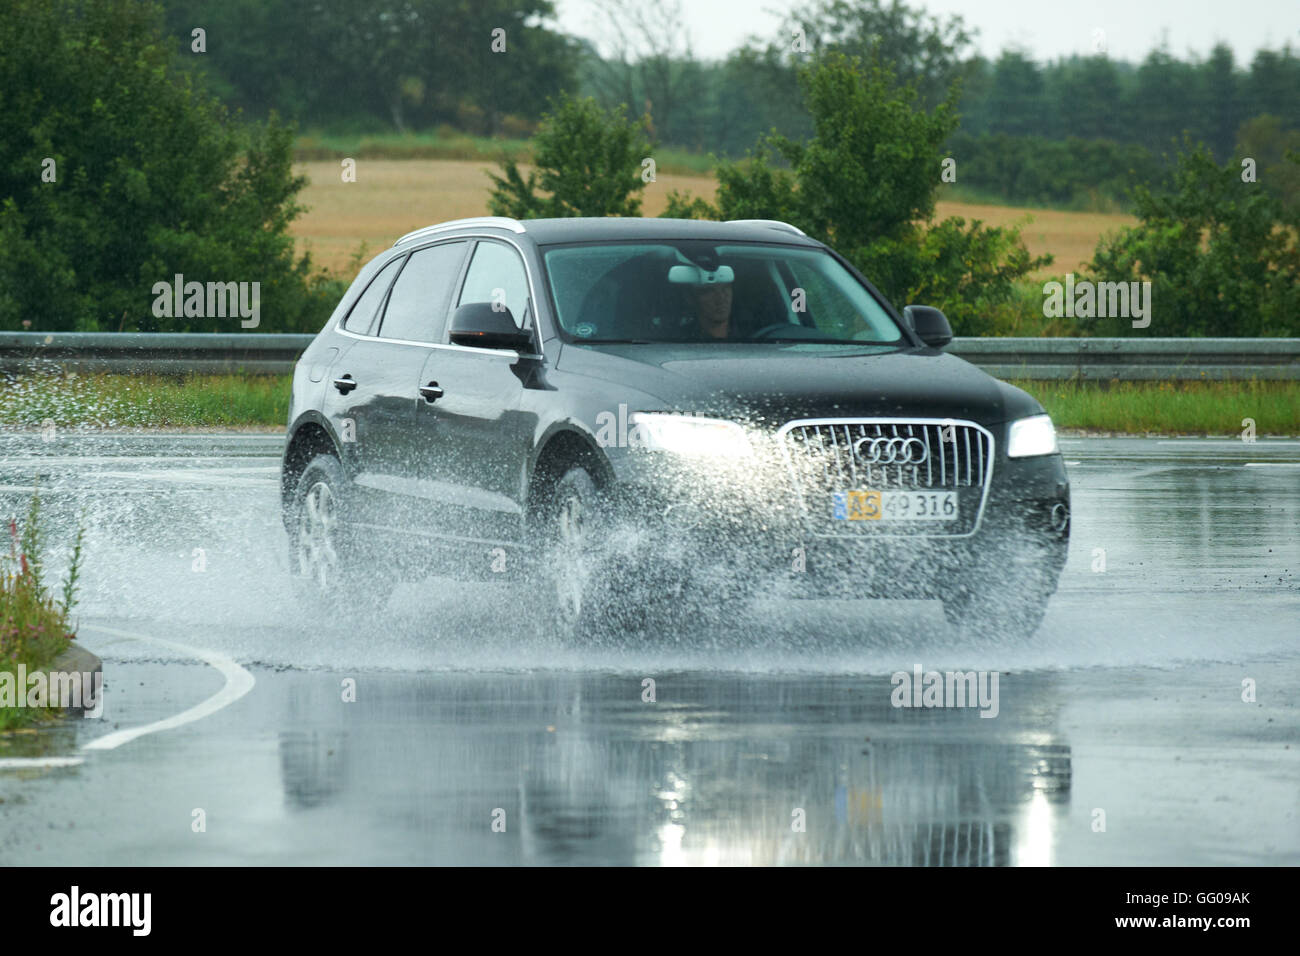 Viborg, Denmark 3rd August 2016: the nice summer weather was suddenly interrupted by thunder and lightning, followed by heavy rain showers. Lots of water on the roads suprised car drivers. Credit:  Brian Bjeldbak/Alamy Live News Stock Photo